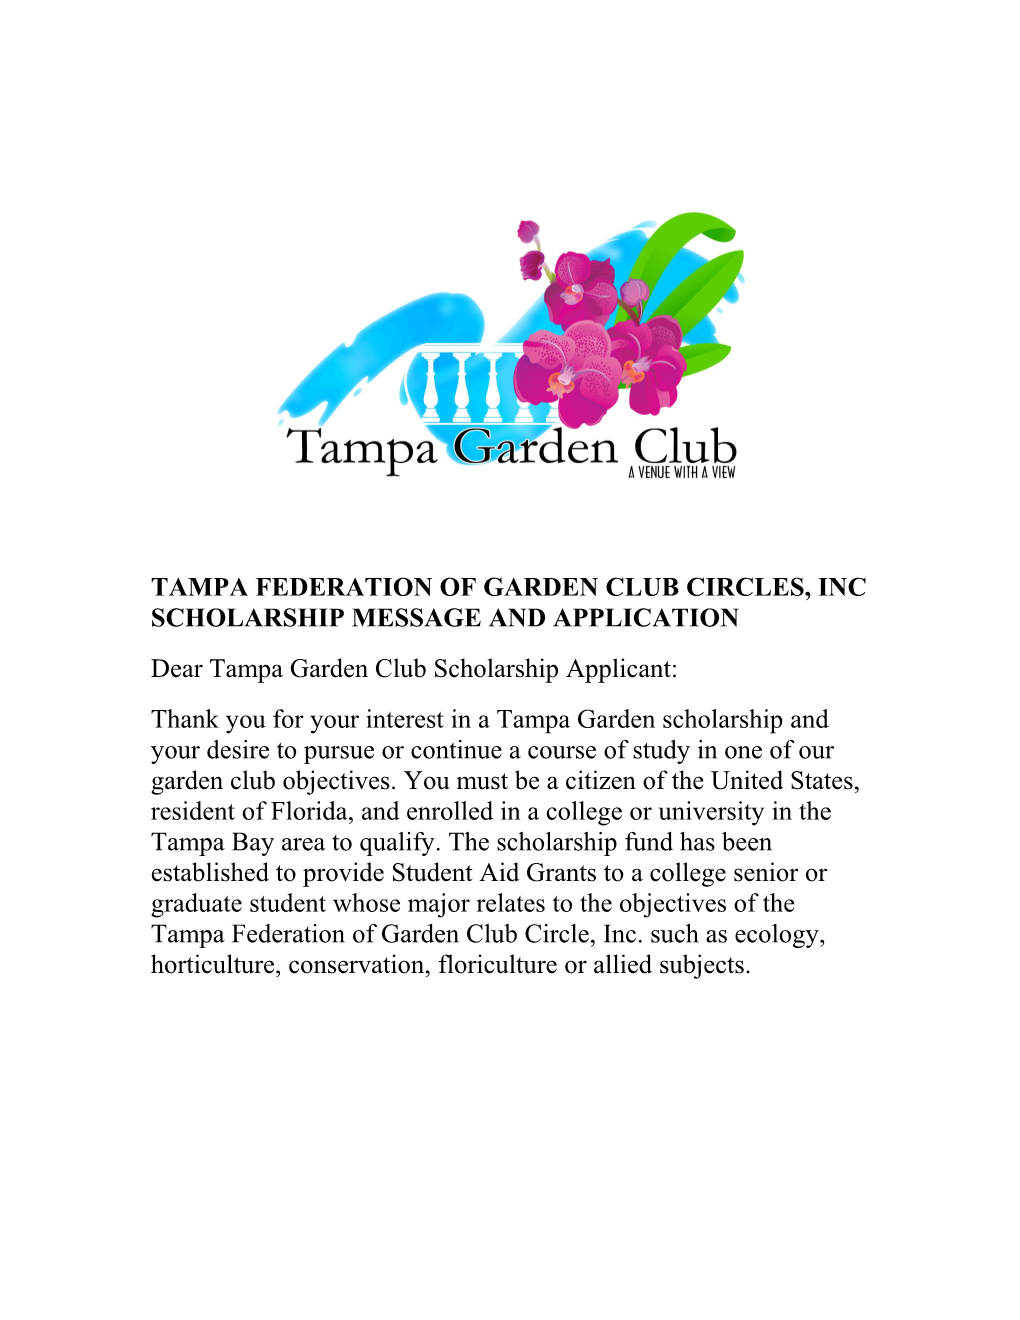 Tampa Federation of Garden Club Circles, Inc Scholarship Message and Application